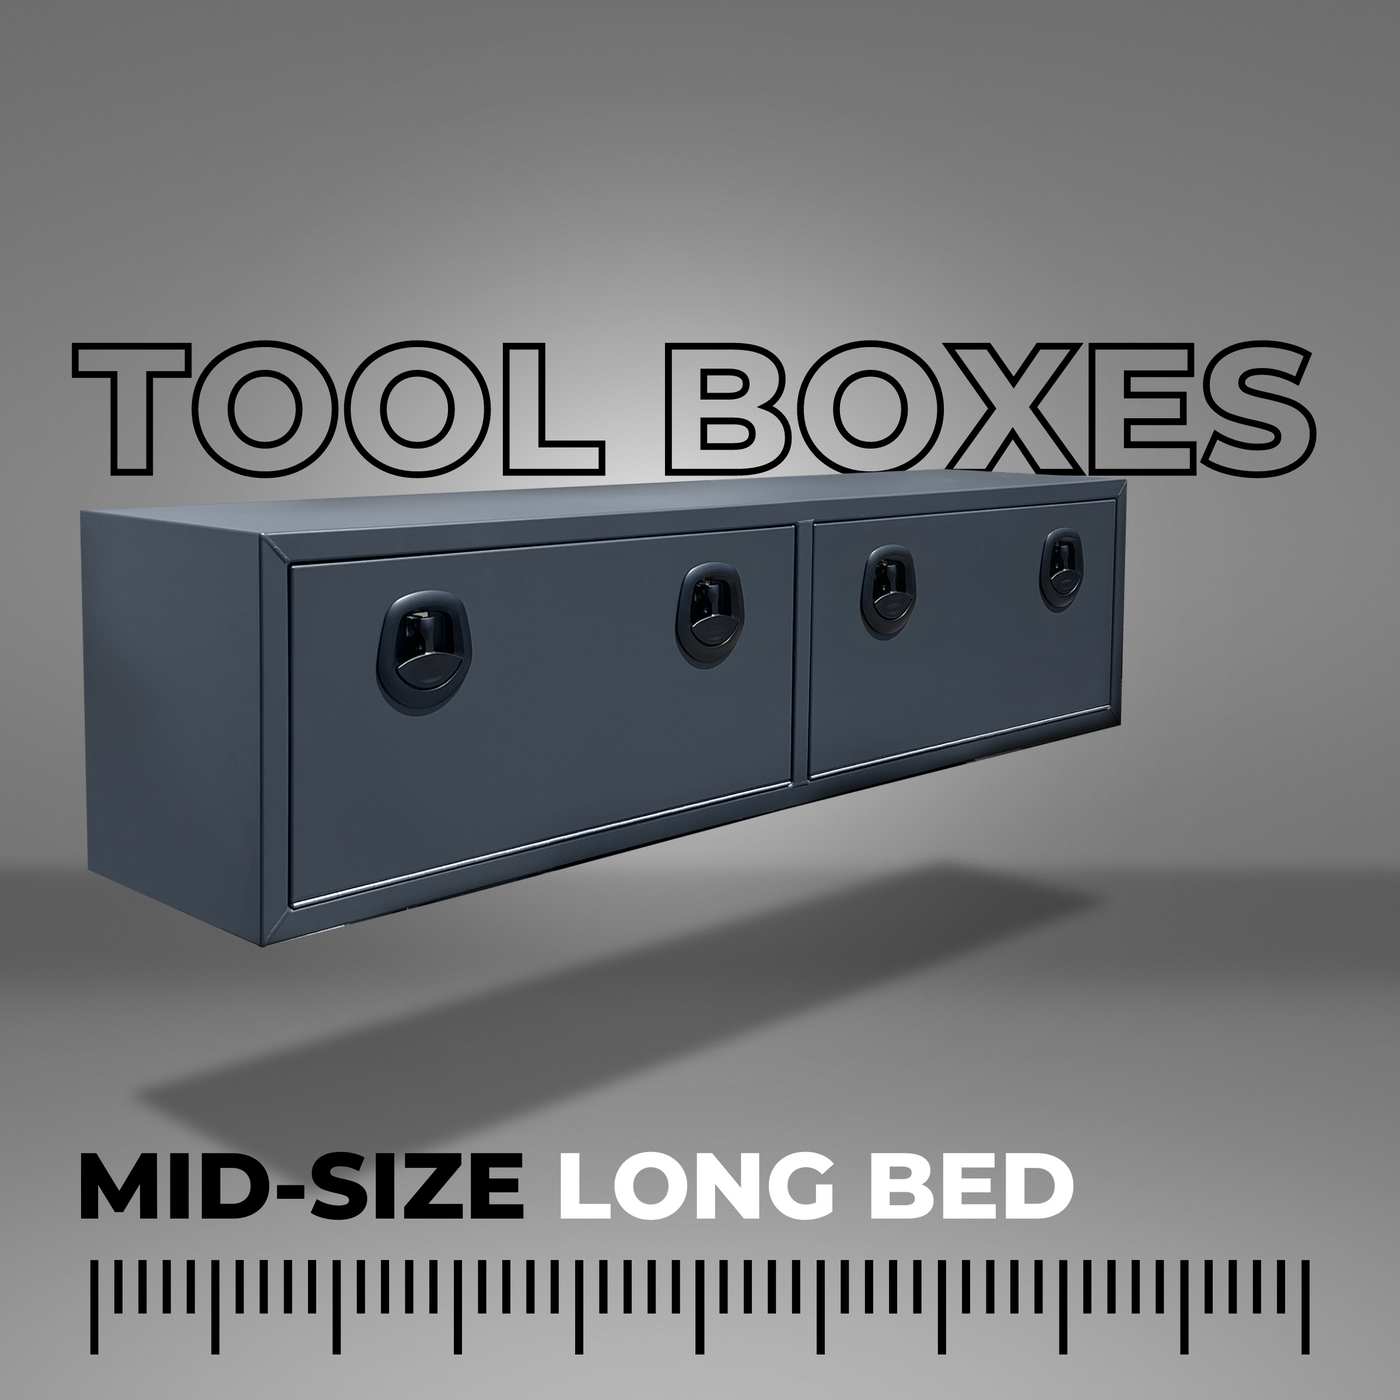 Tool Boxes For Mid-Size Long Bed